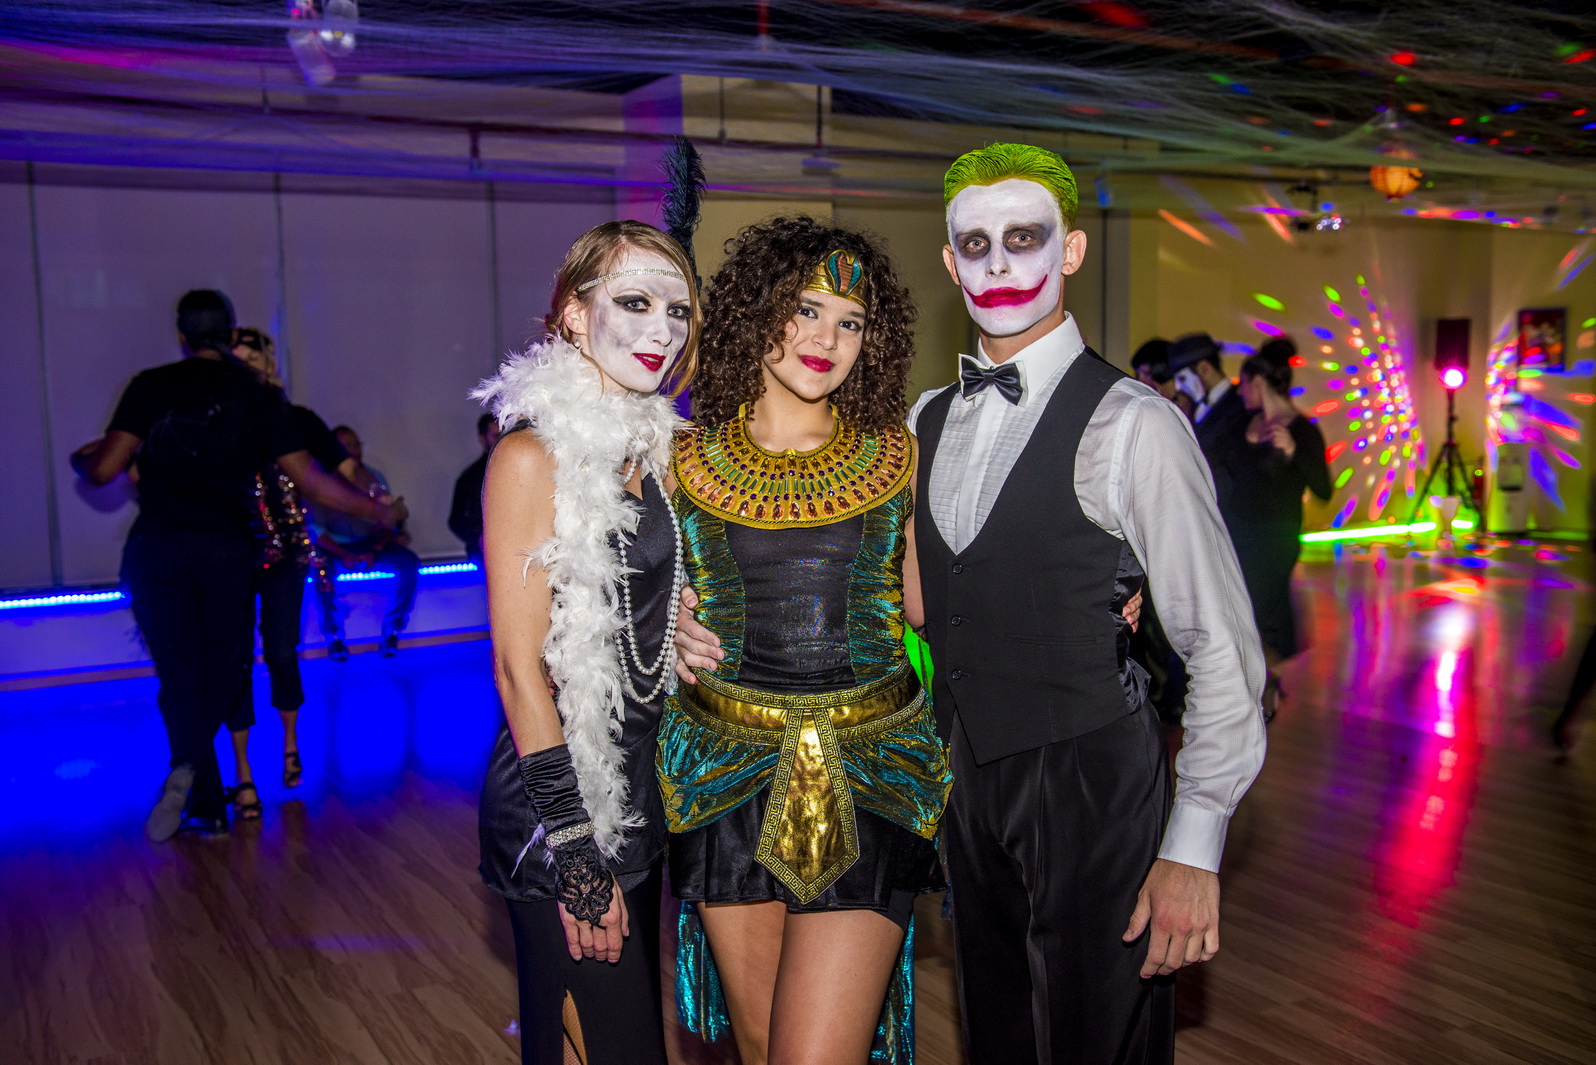 Book tickets for Halloween Dance Party 2016 in Dubai